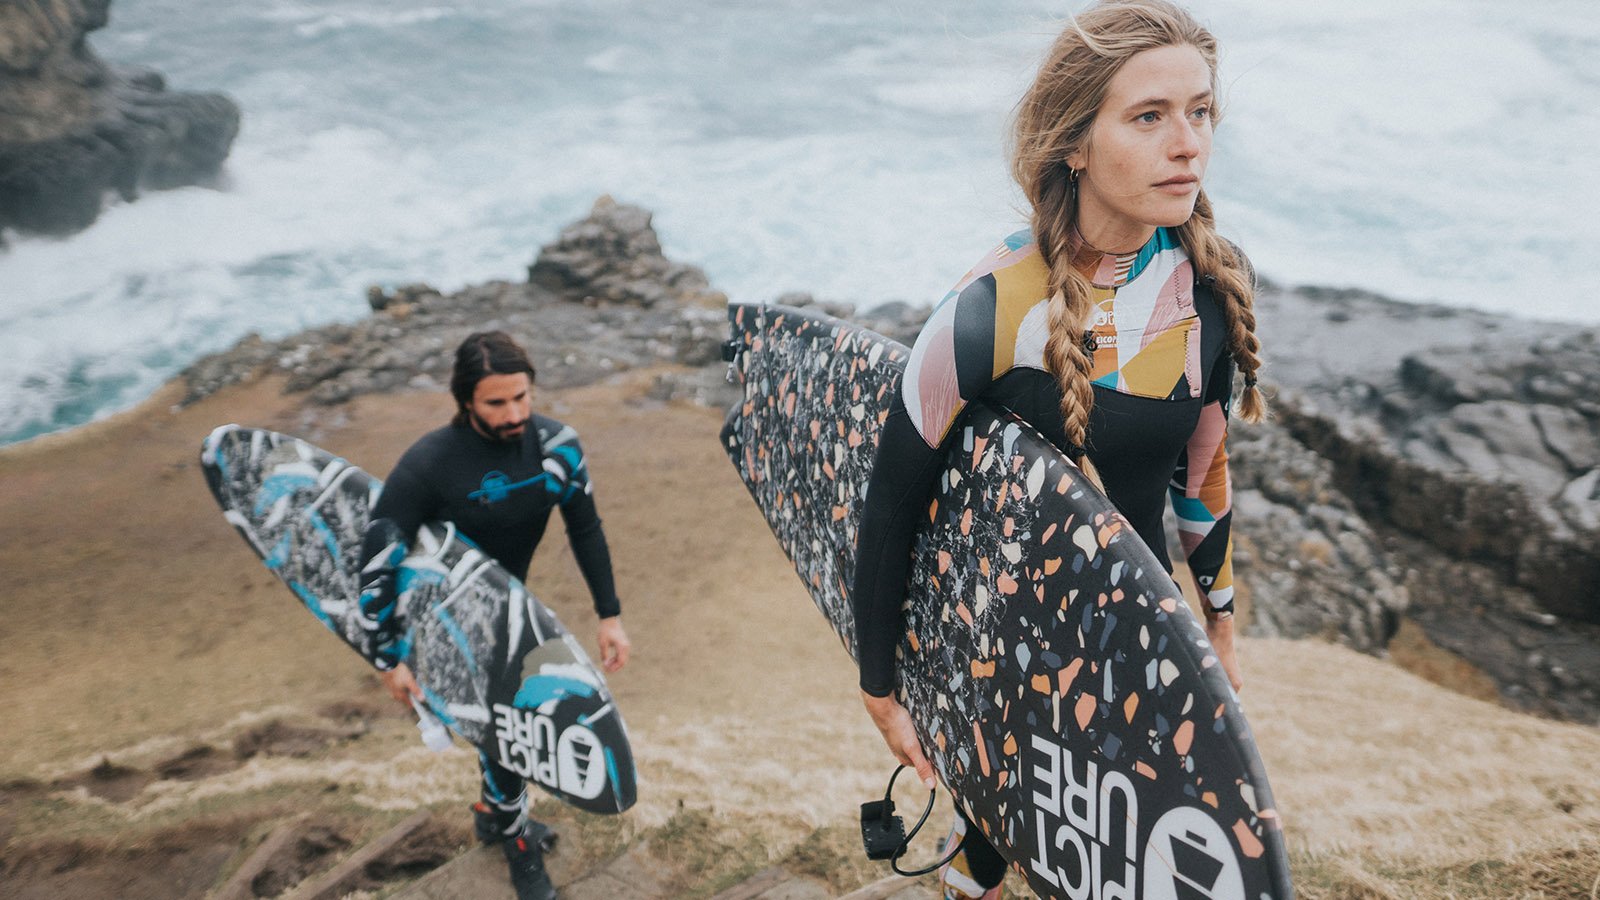 Picture Organic Clothing's SS20 Wetsuits